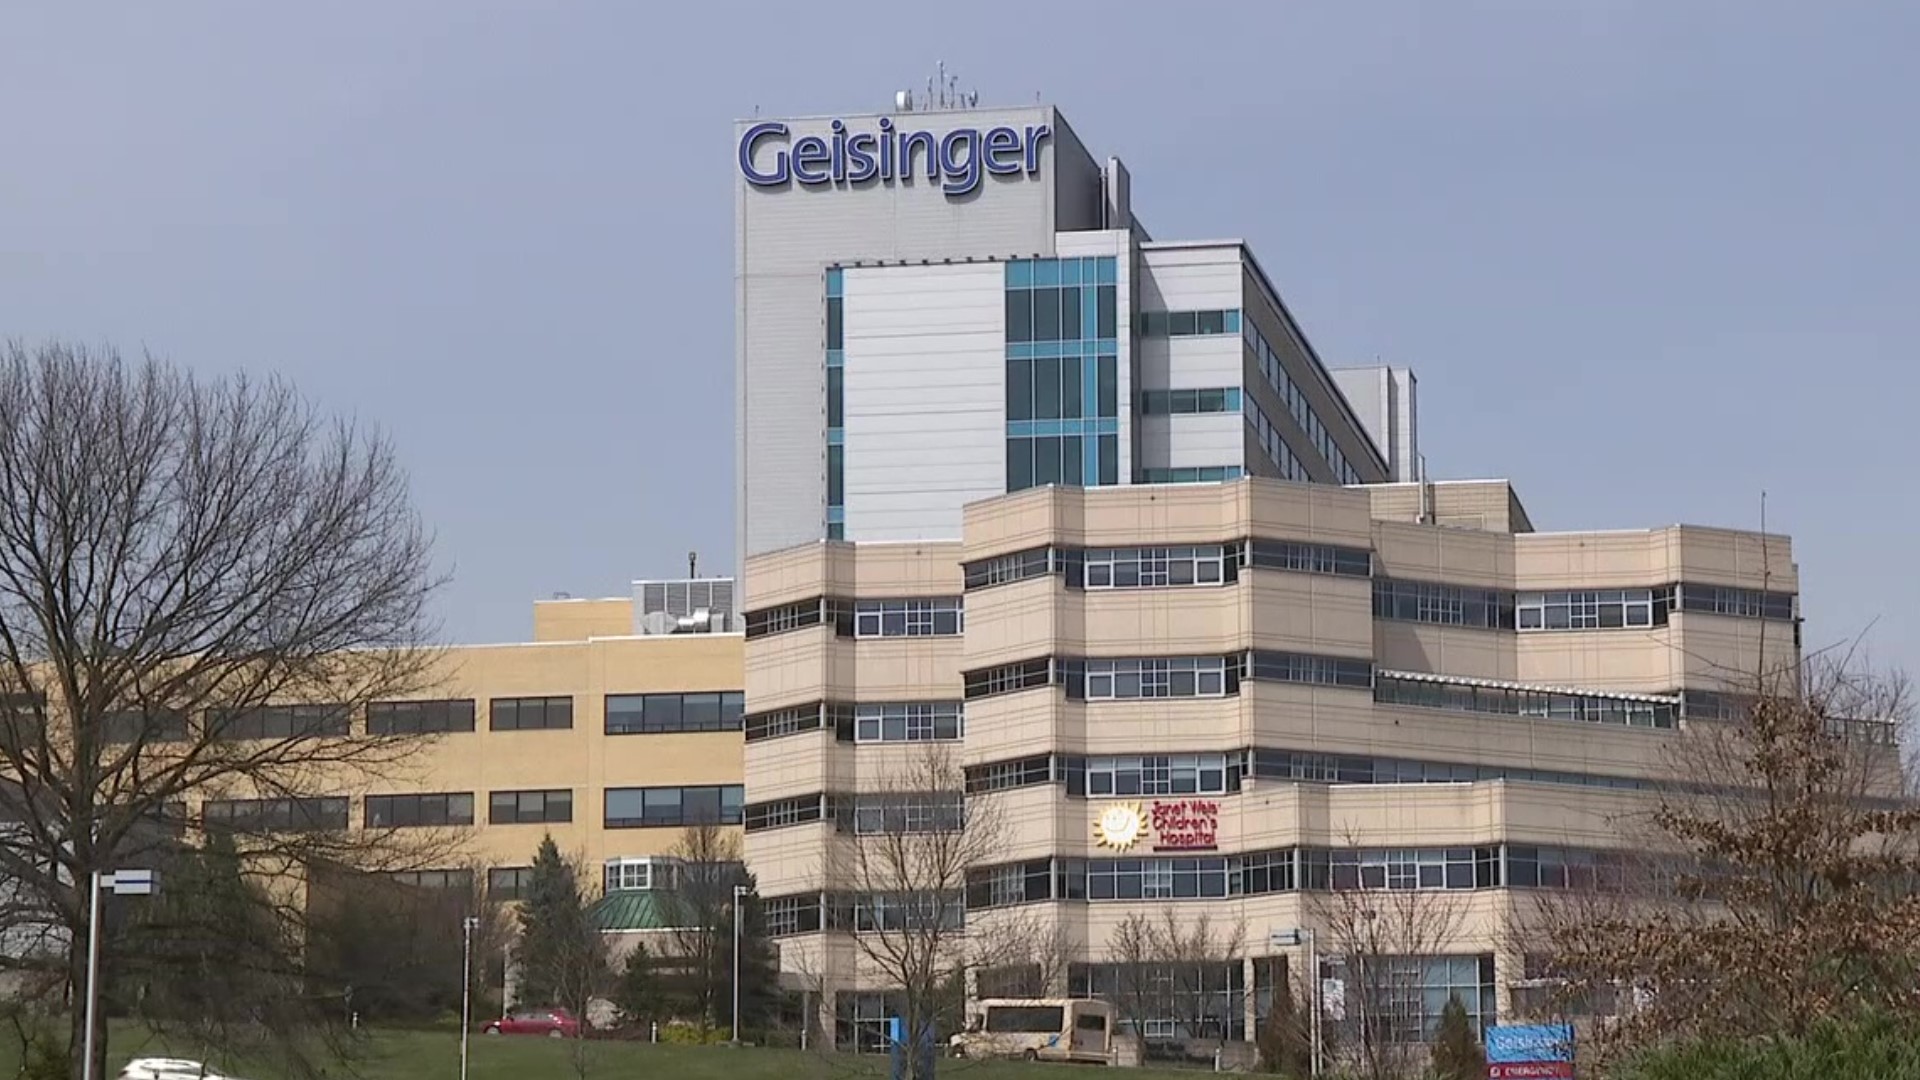 Geisinger will restrict routine in-person visits to hospitalized patients until further notice because of the increase in coronavirus cases.